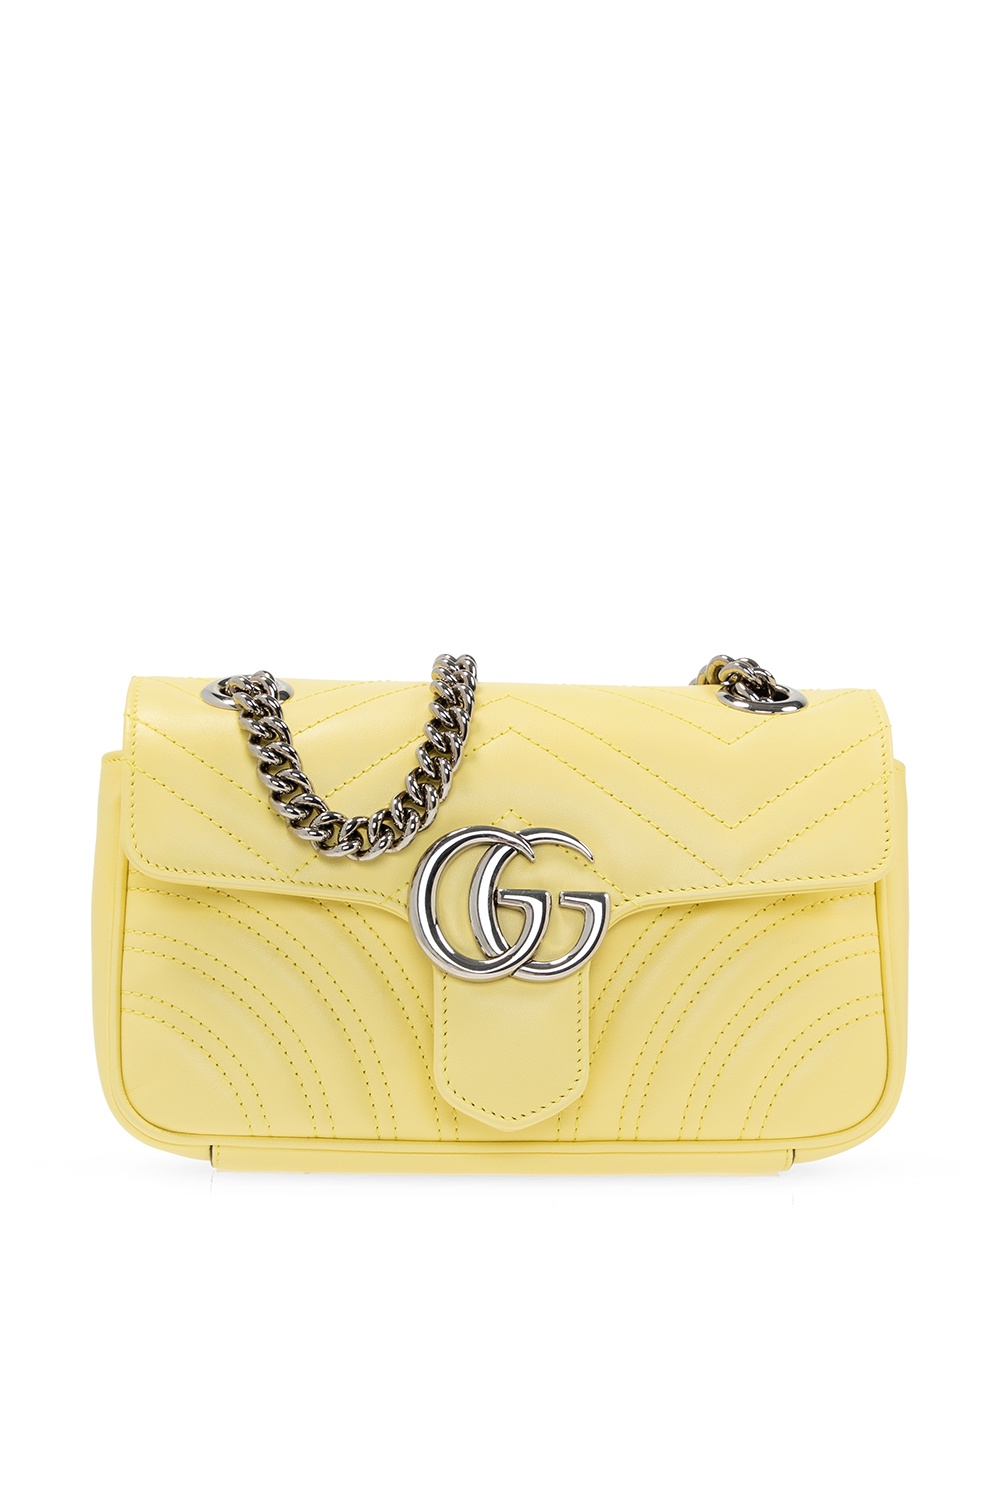 Gucci Interlocking GG Wallet on Chain Yellow in Leather with Silver-tone -  US